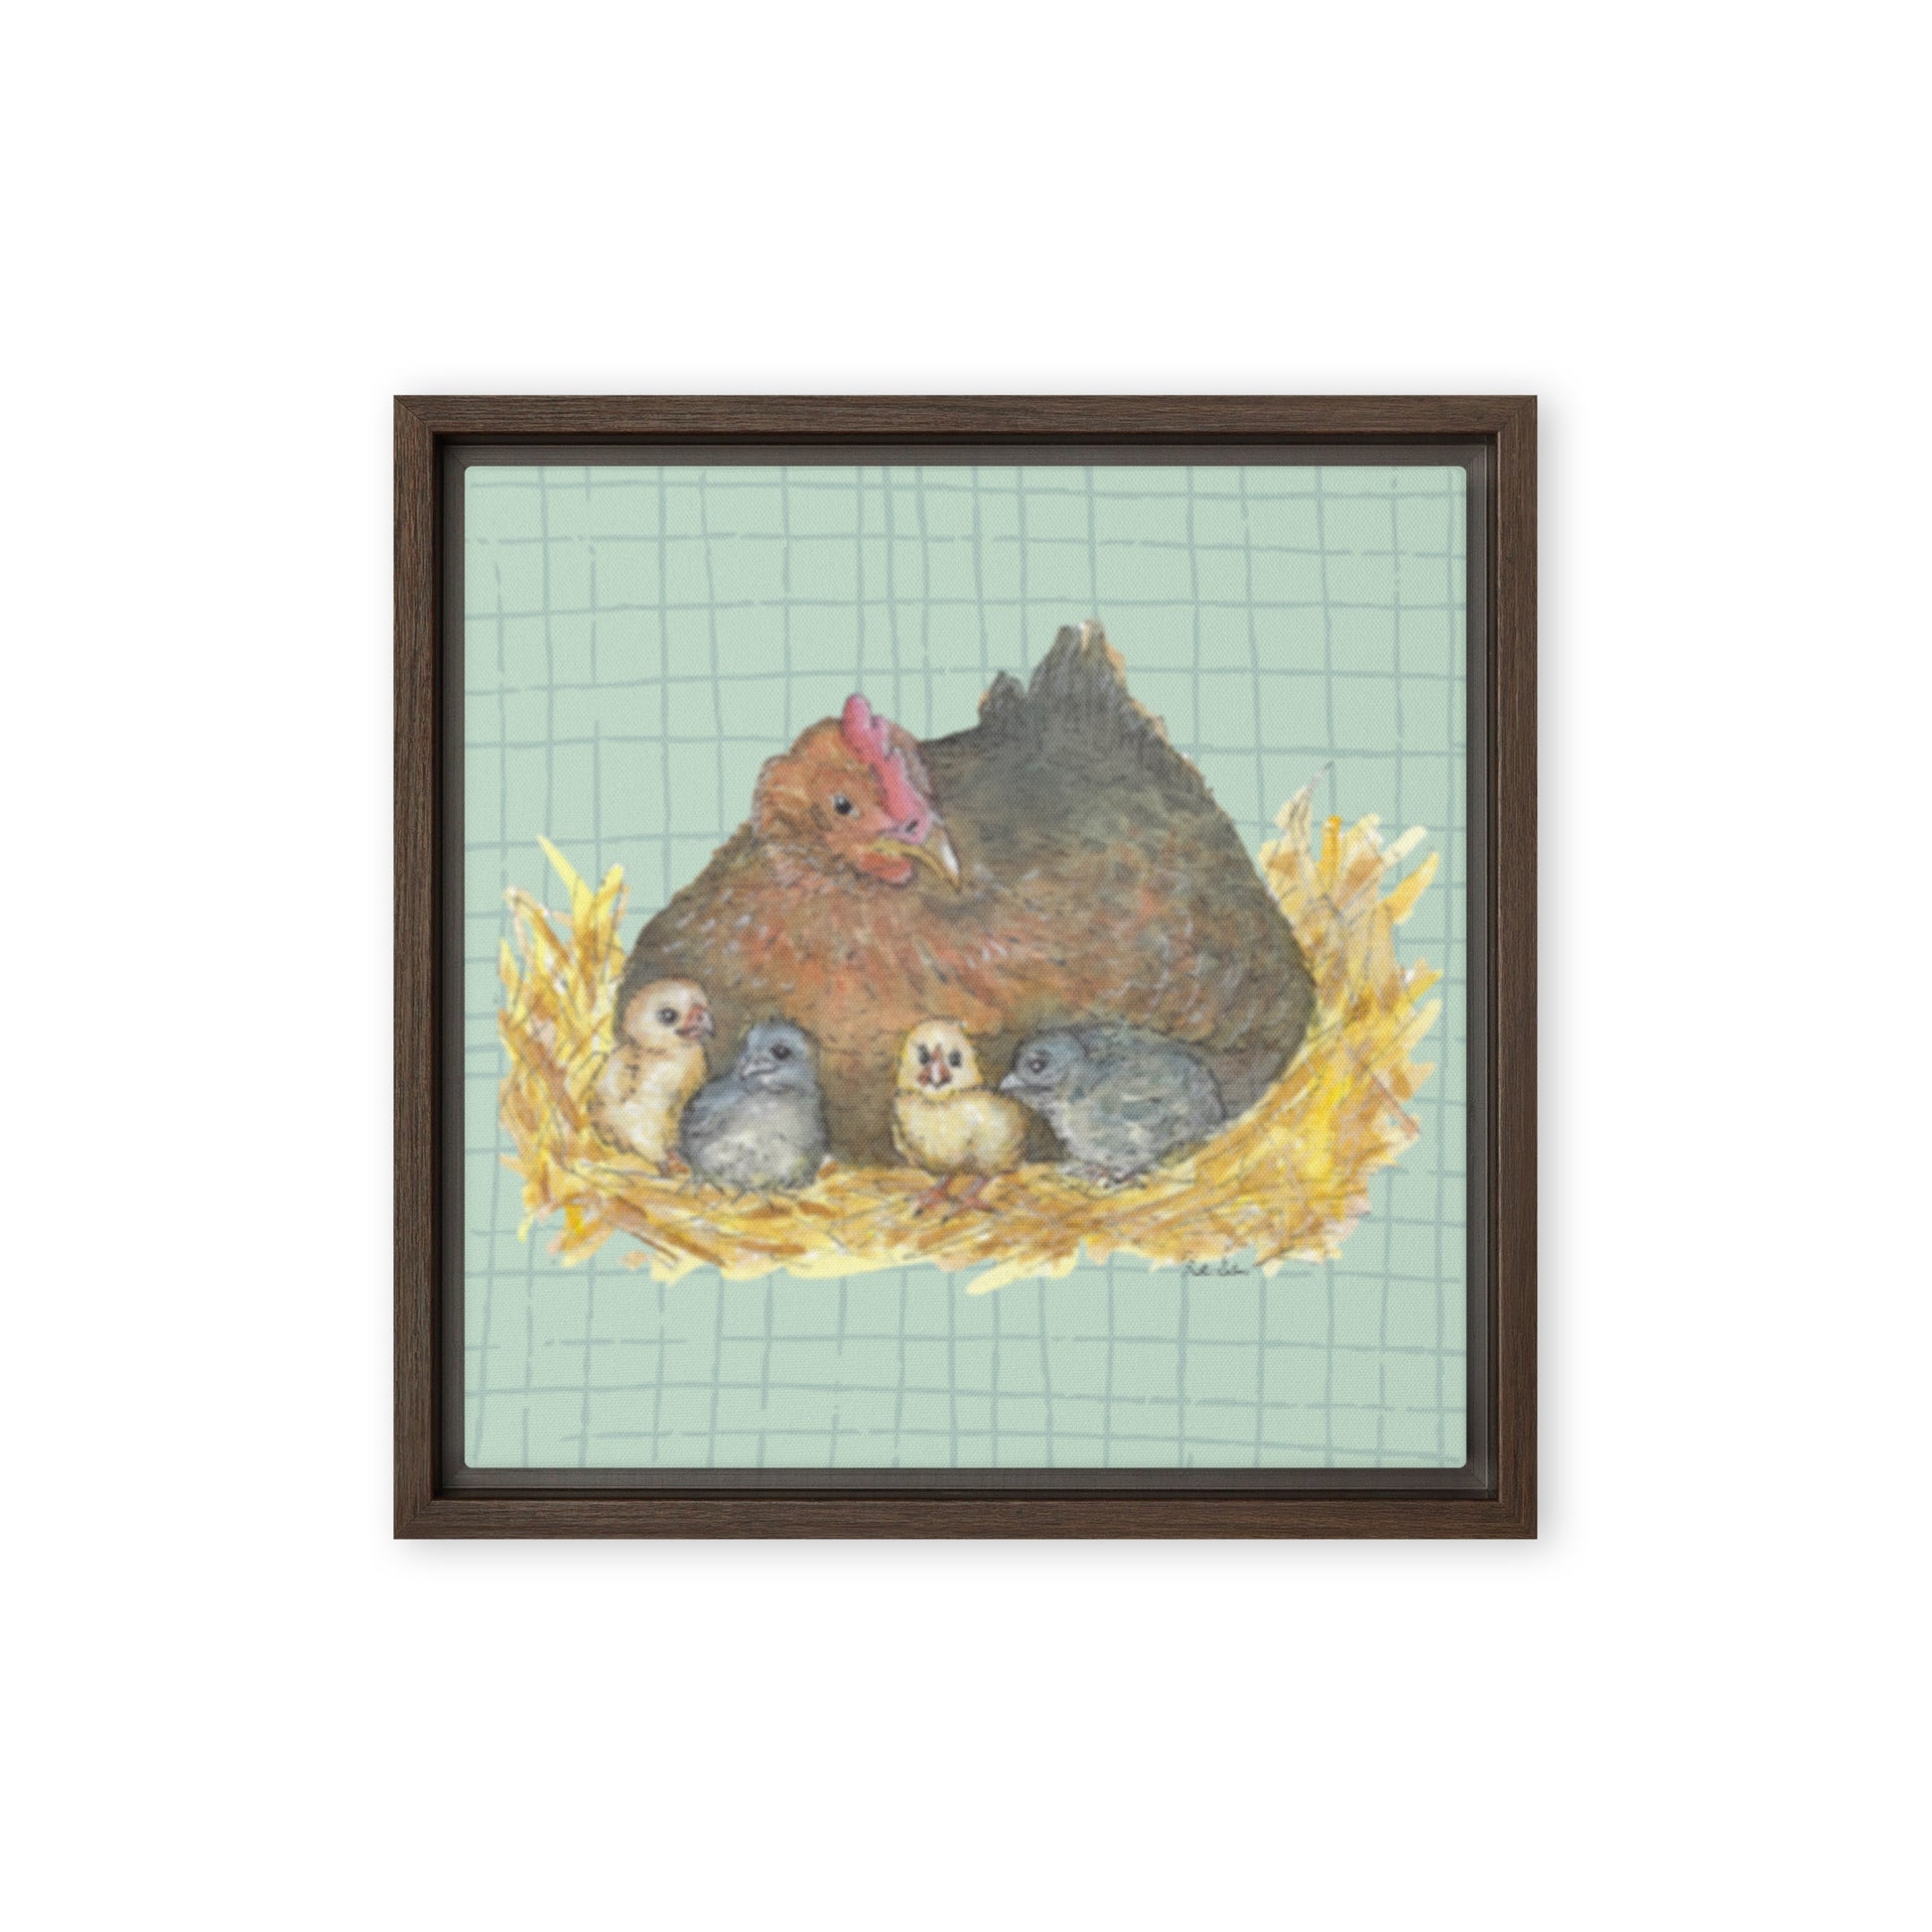 12 by 12 inch Mother Hen Floating Frame Canvas Wall Art. Heather Silver's watercolor painting, Mother Hen, with a green crosshatched background, printed on a stretched canvas and framed with a dark brown pine frame. Hanging hardware included.